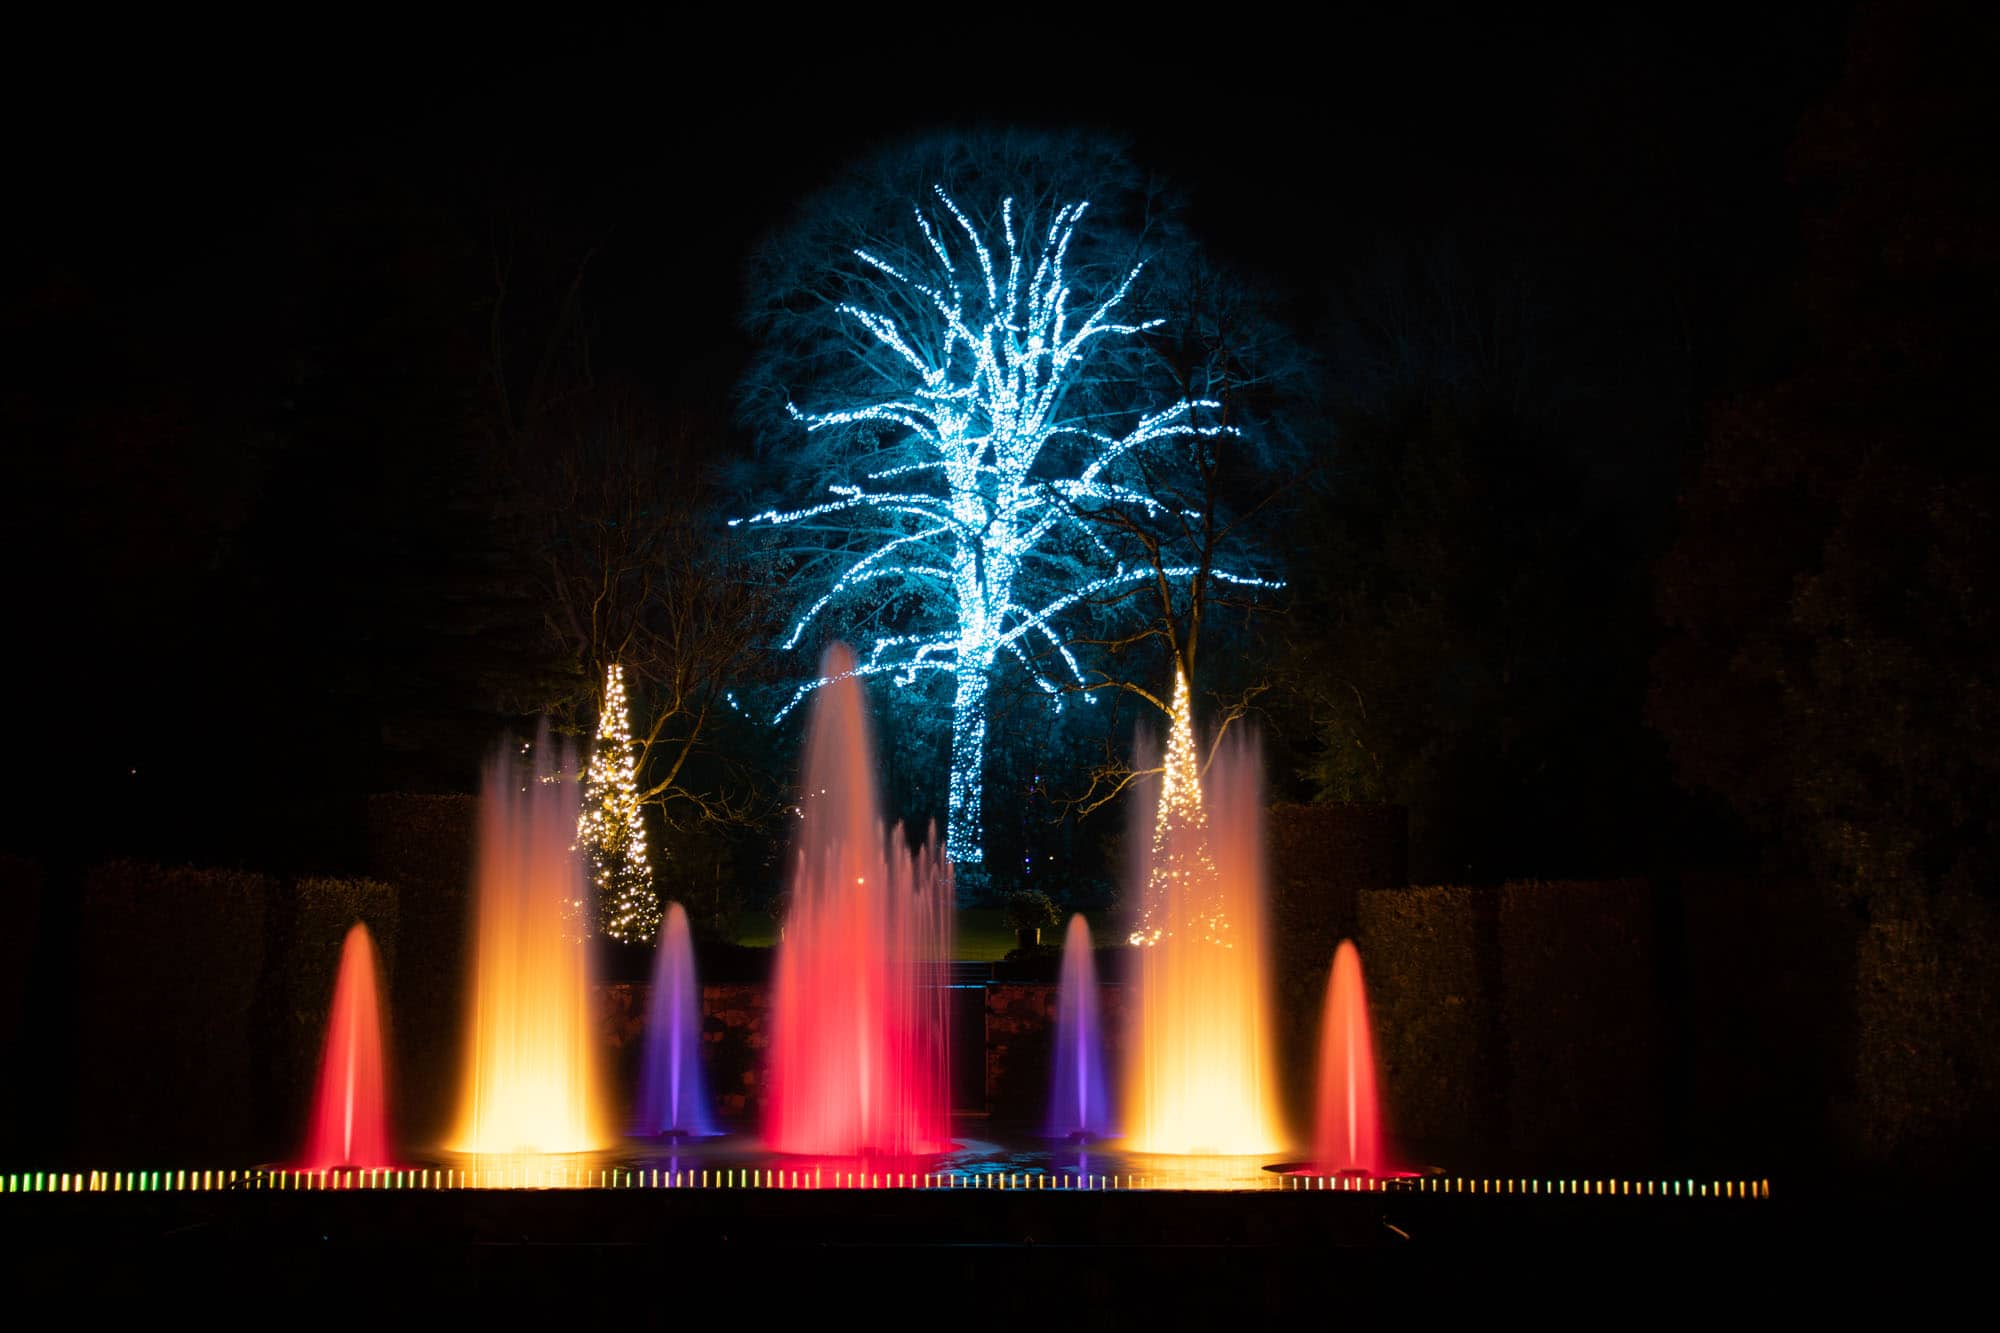 Water jets from a fountain lit with red and white lights in front of an illuminated tree.